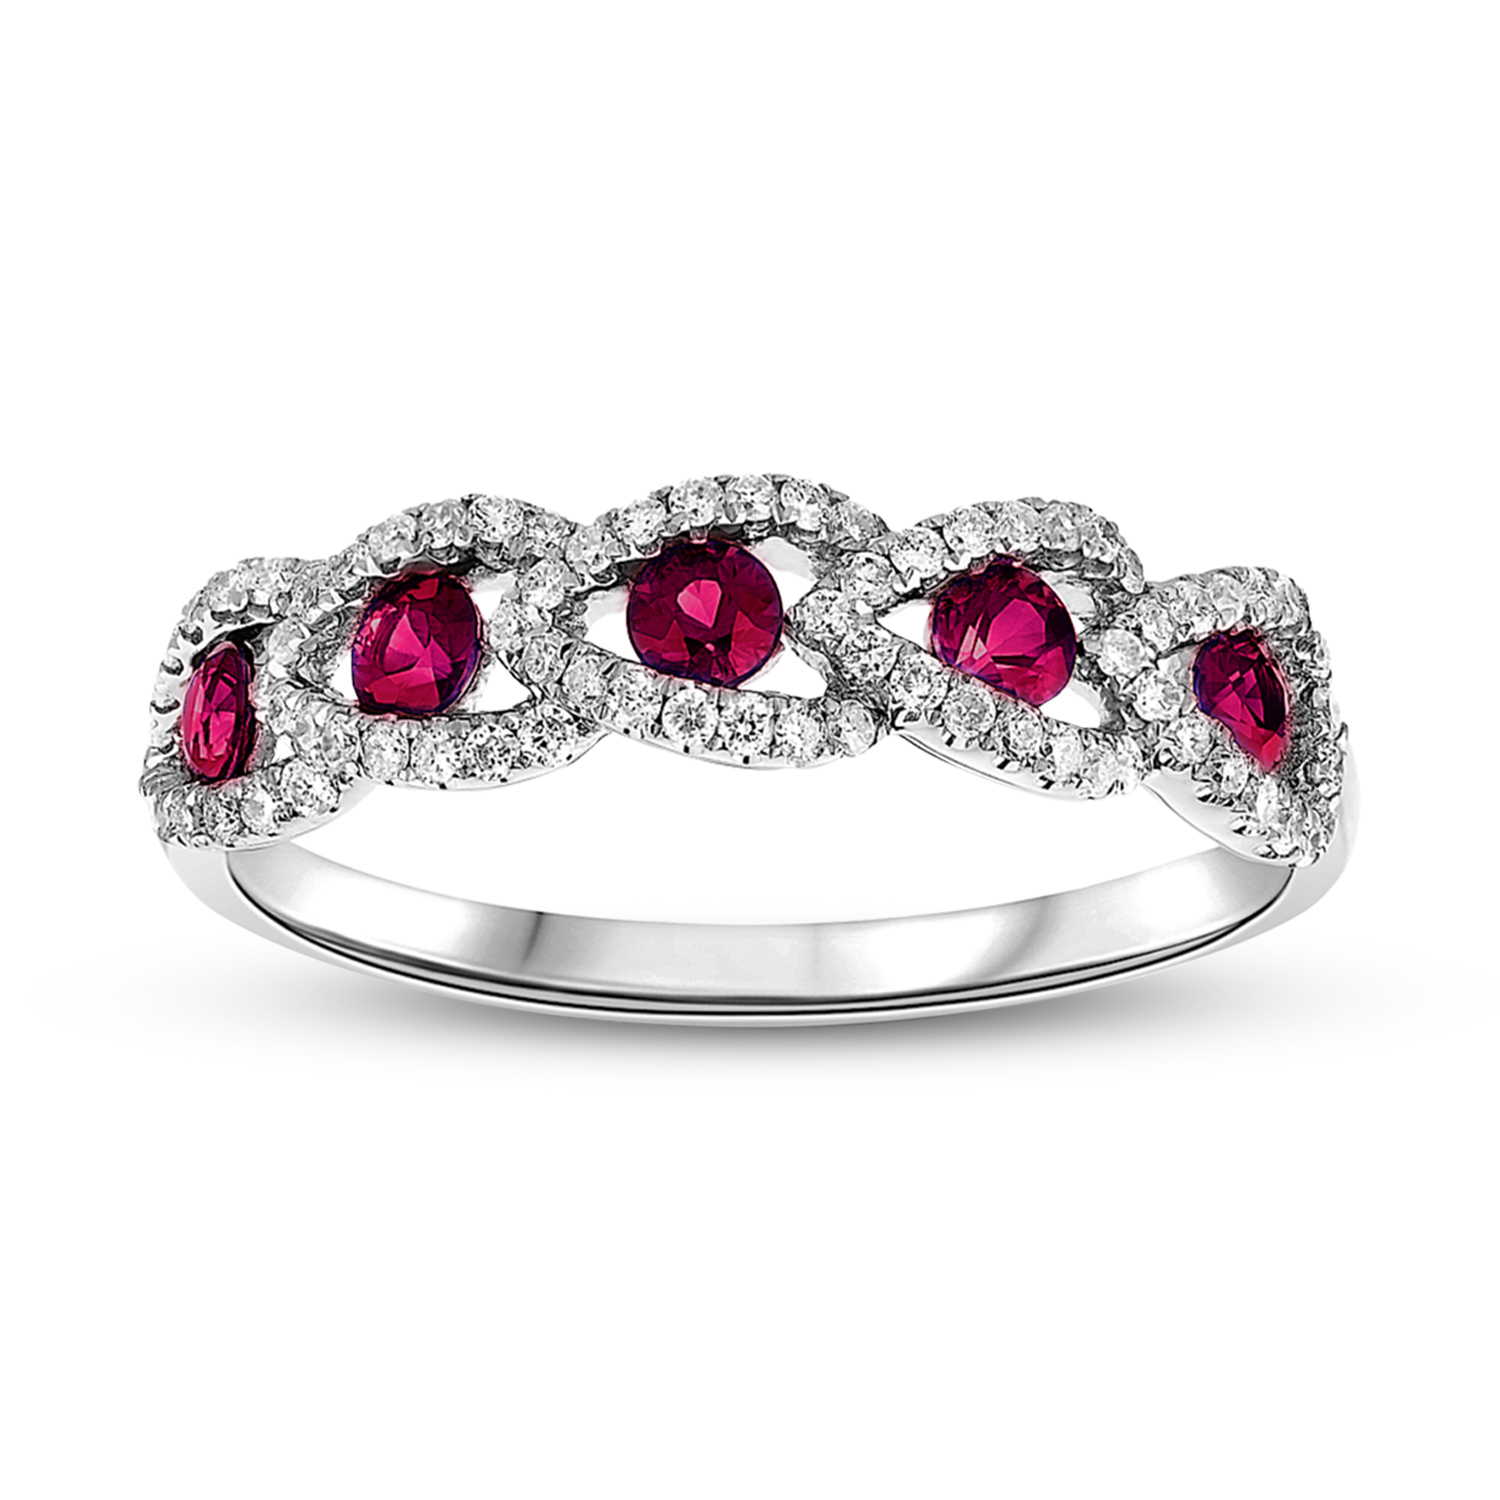 View 0.70ctw Diamond and Ruby Wedding Band in 18k Gold